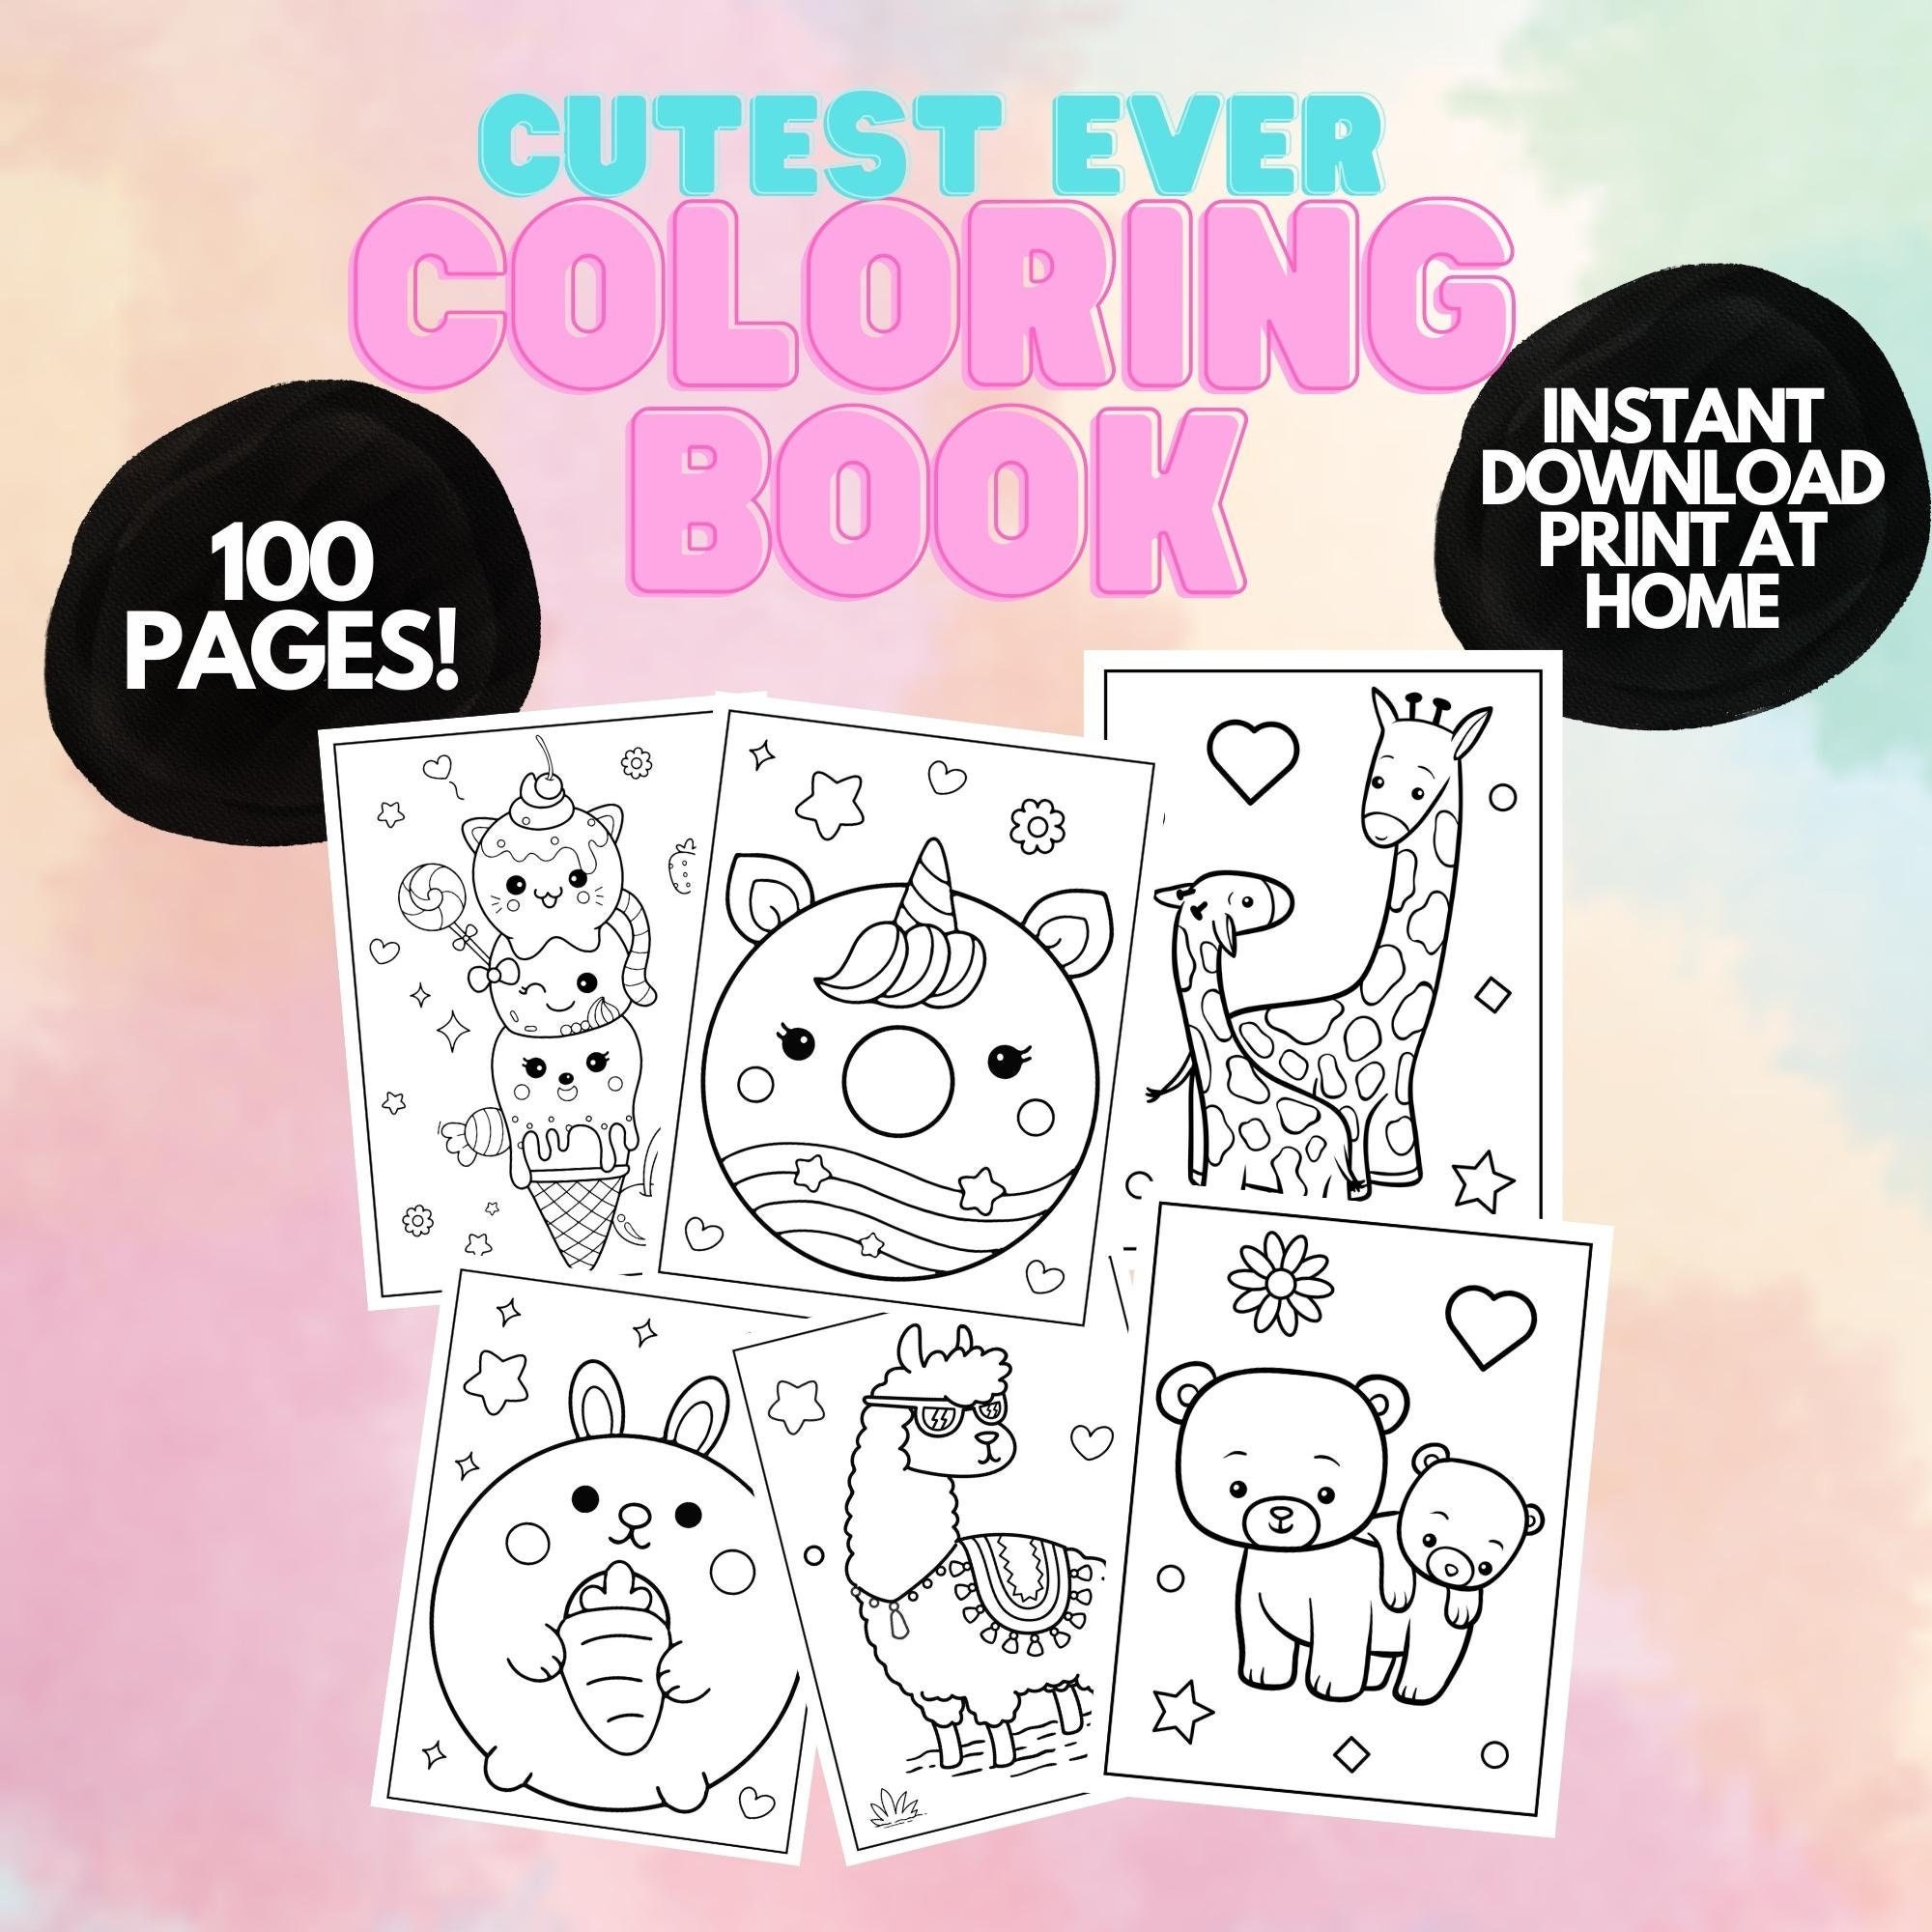 Kawaii Cute Coloring Book Set W/Color Pencils & 150 Stickers By Bookoli UK  New!